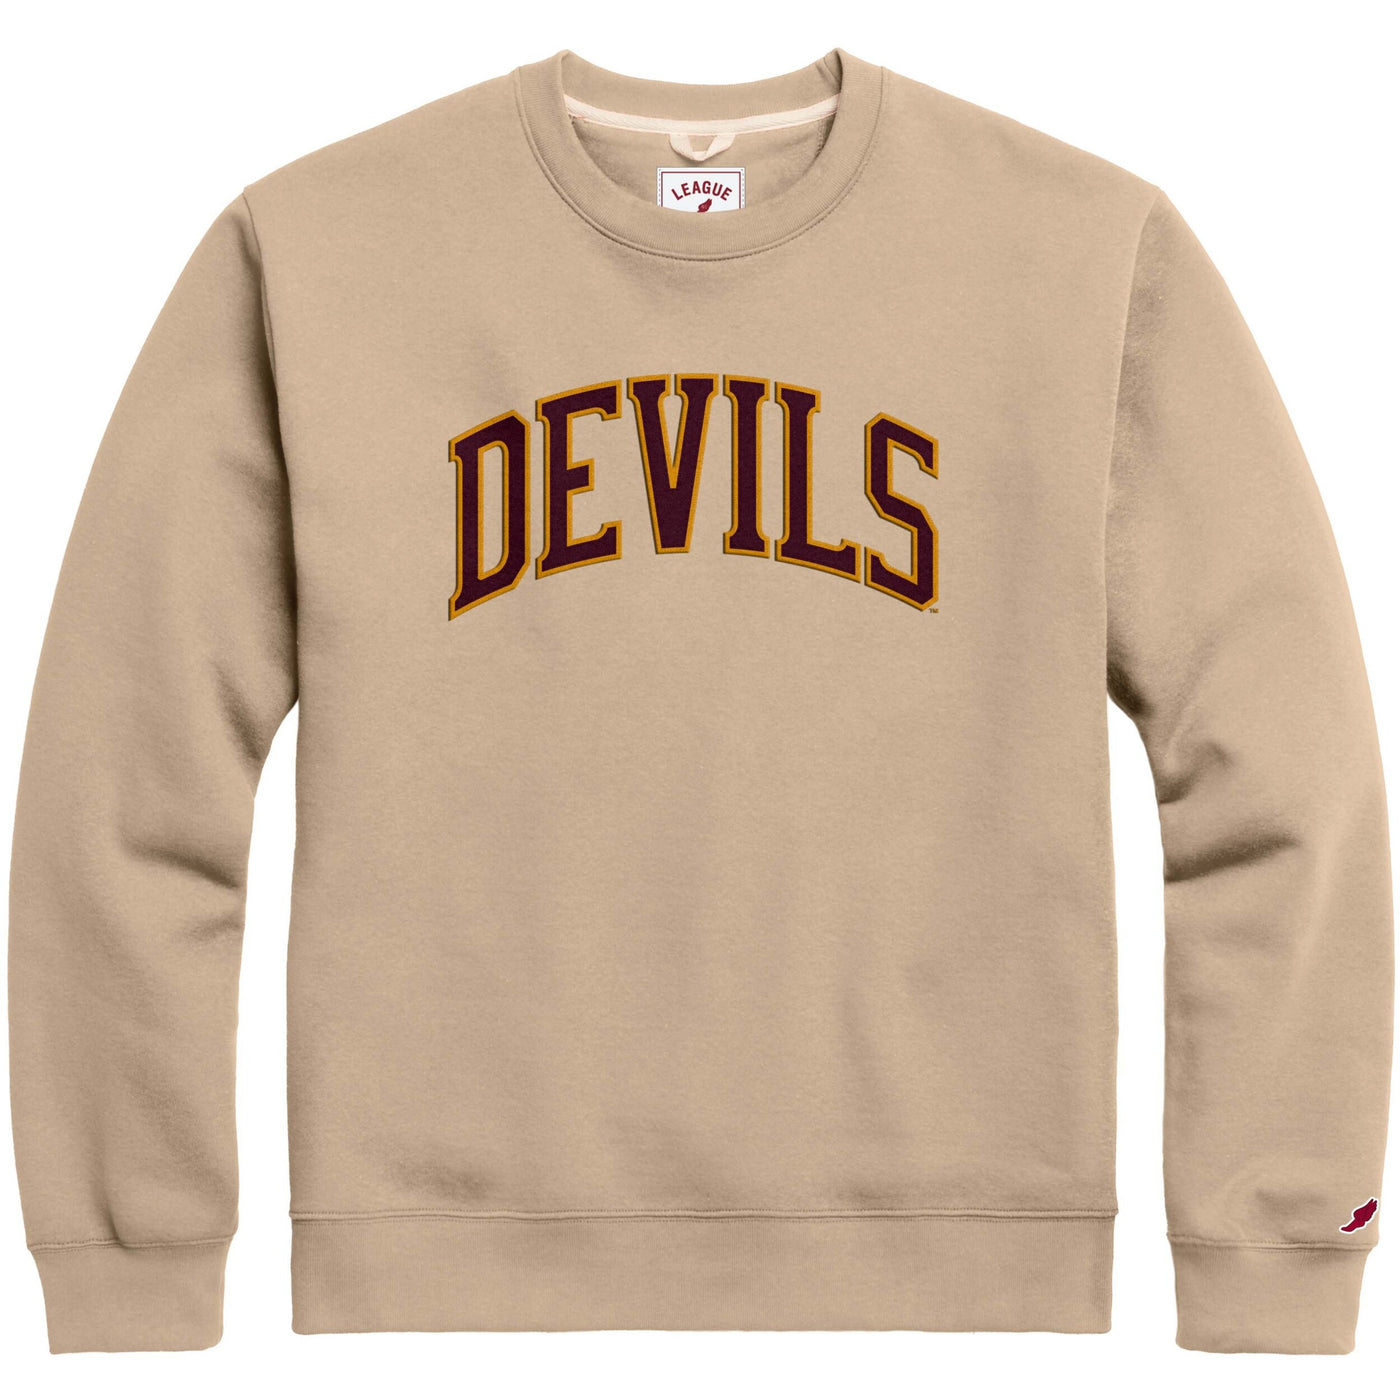 ASU tan crew neck with the patched text 